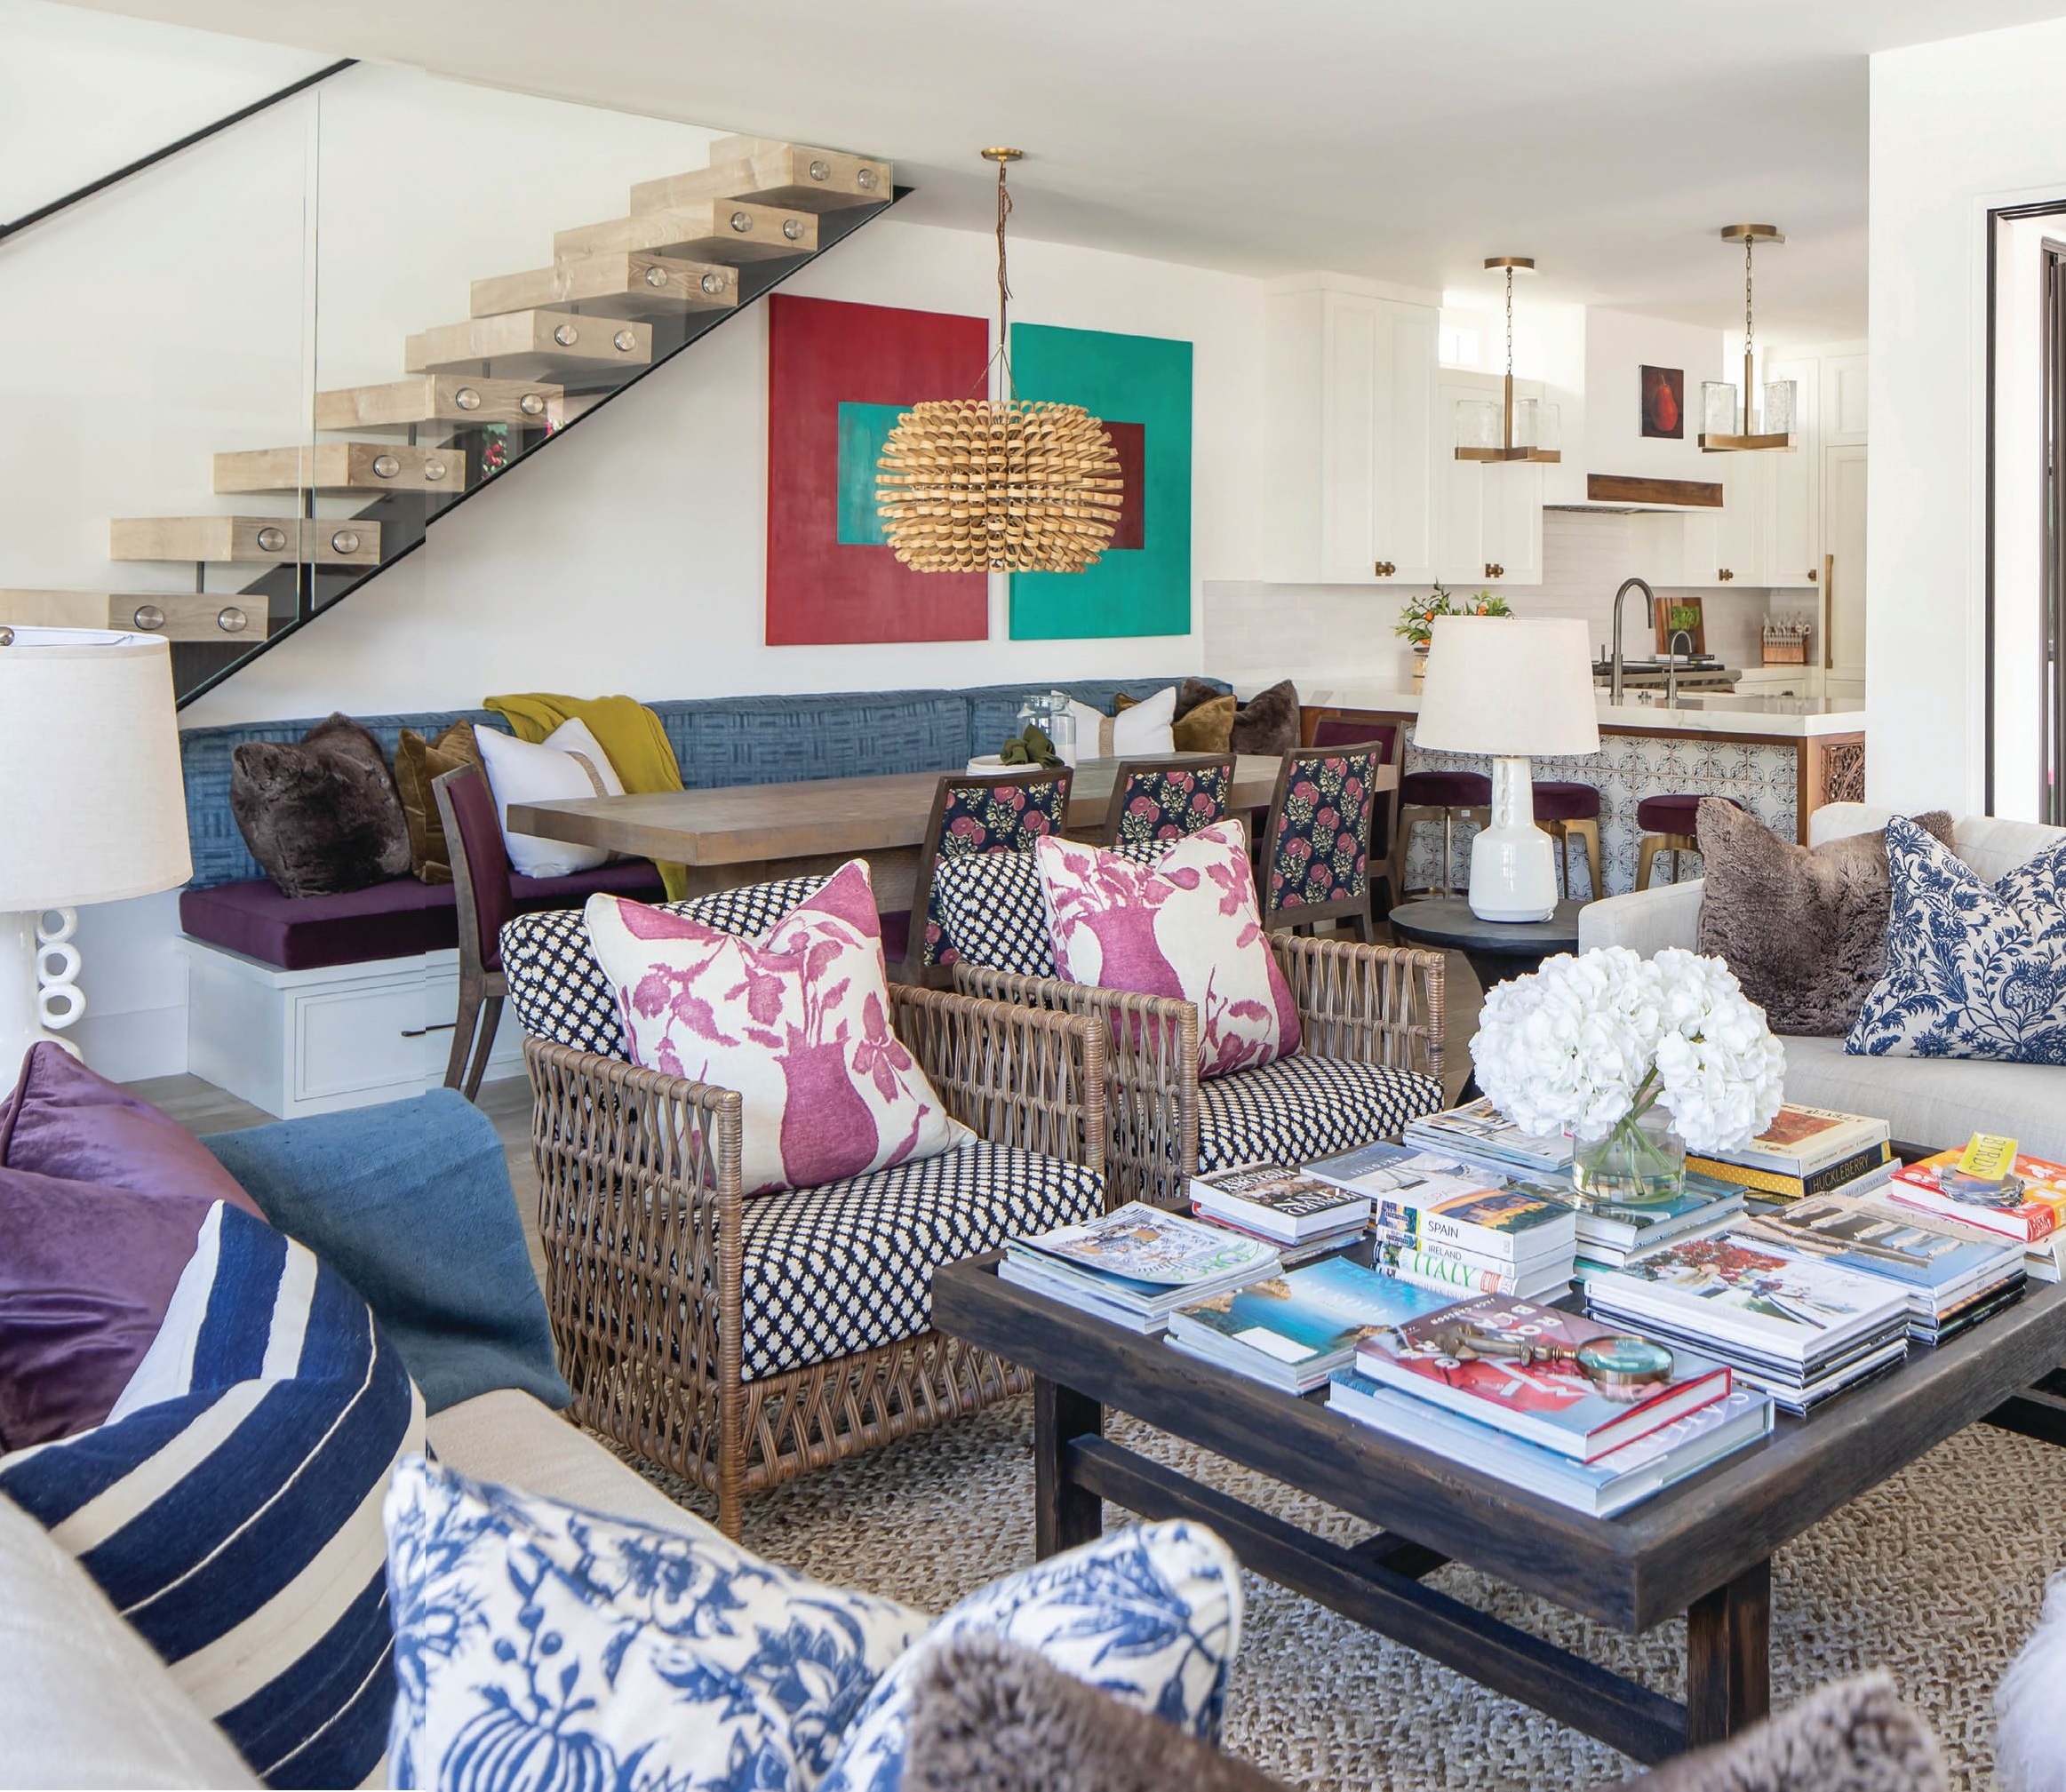 Wendy employed her flair for mixing fabrics in the open living and dining space. PHOTOGRAPHED BY RYAN GARVIN